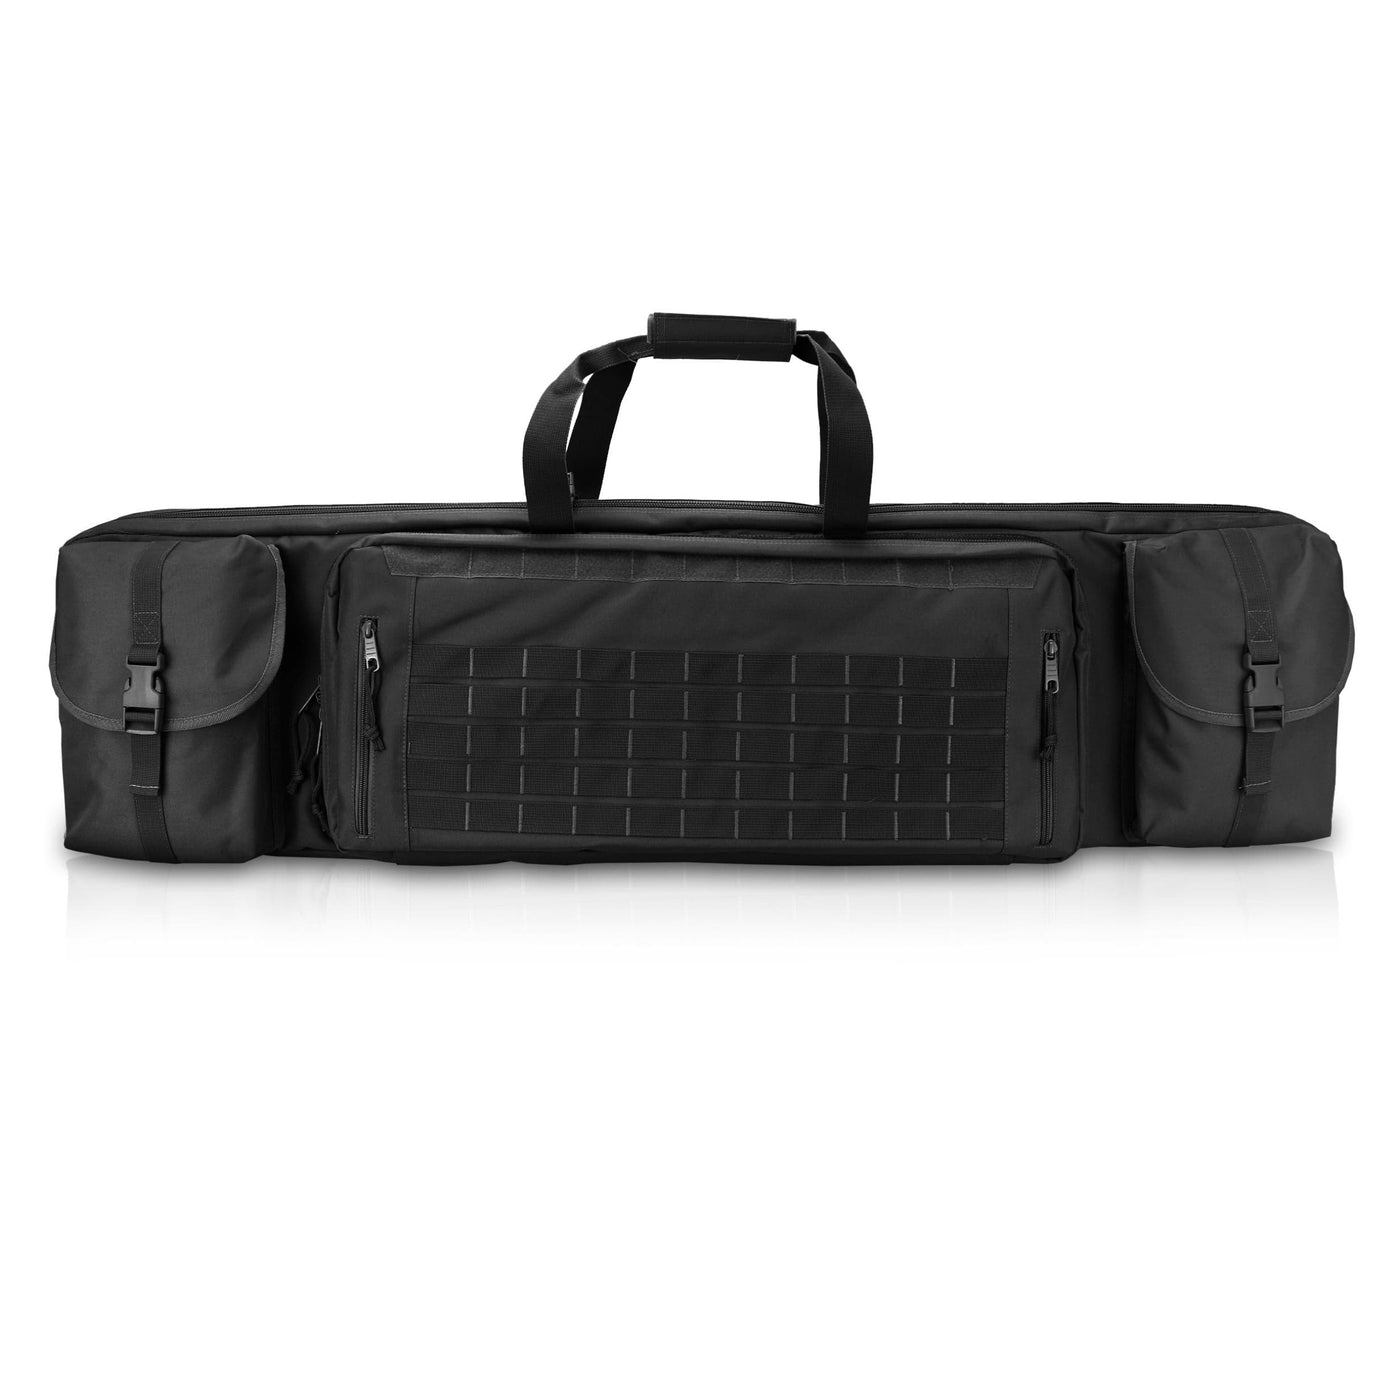 Osage River Osage River 51 in Double Rifle Case Black Shooting